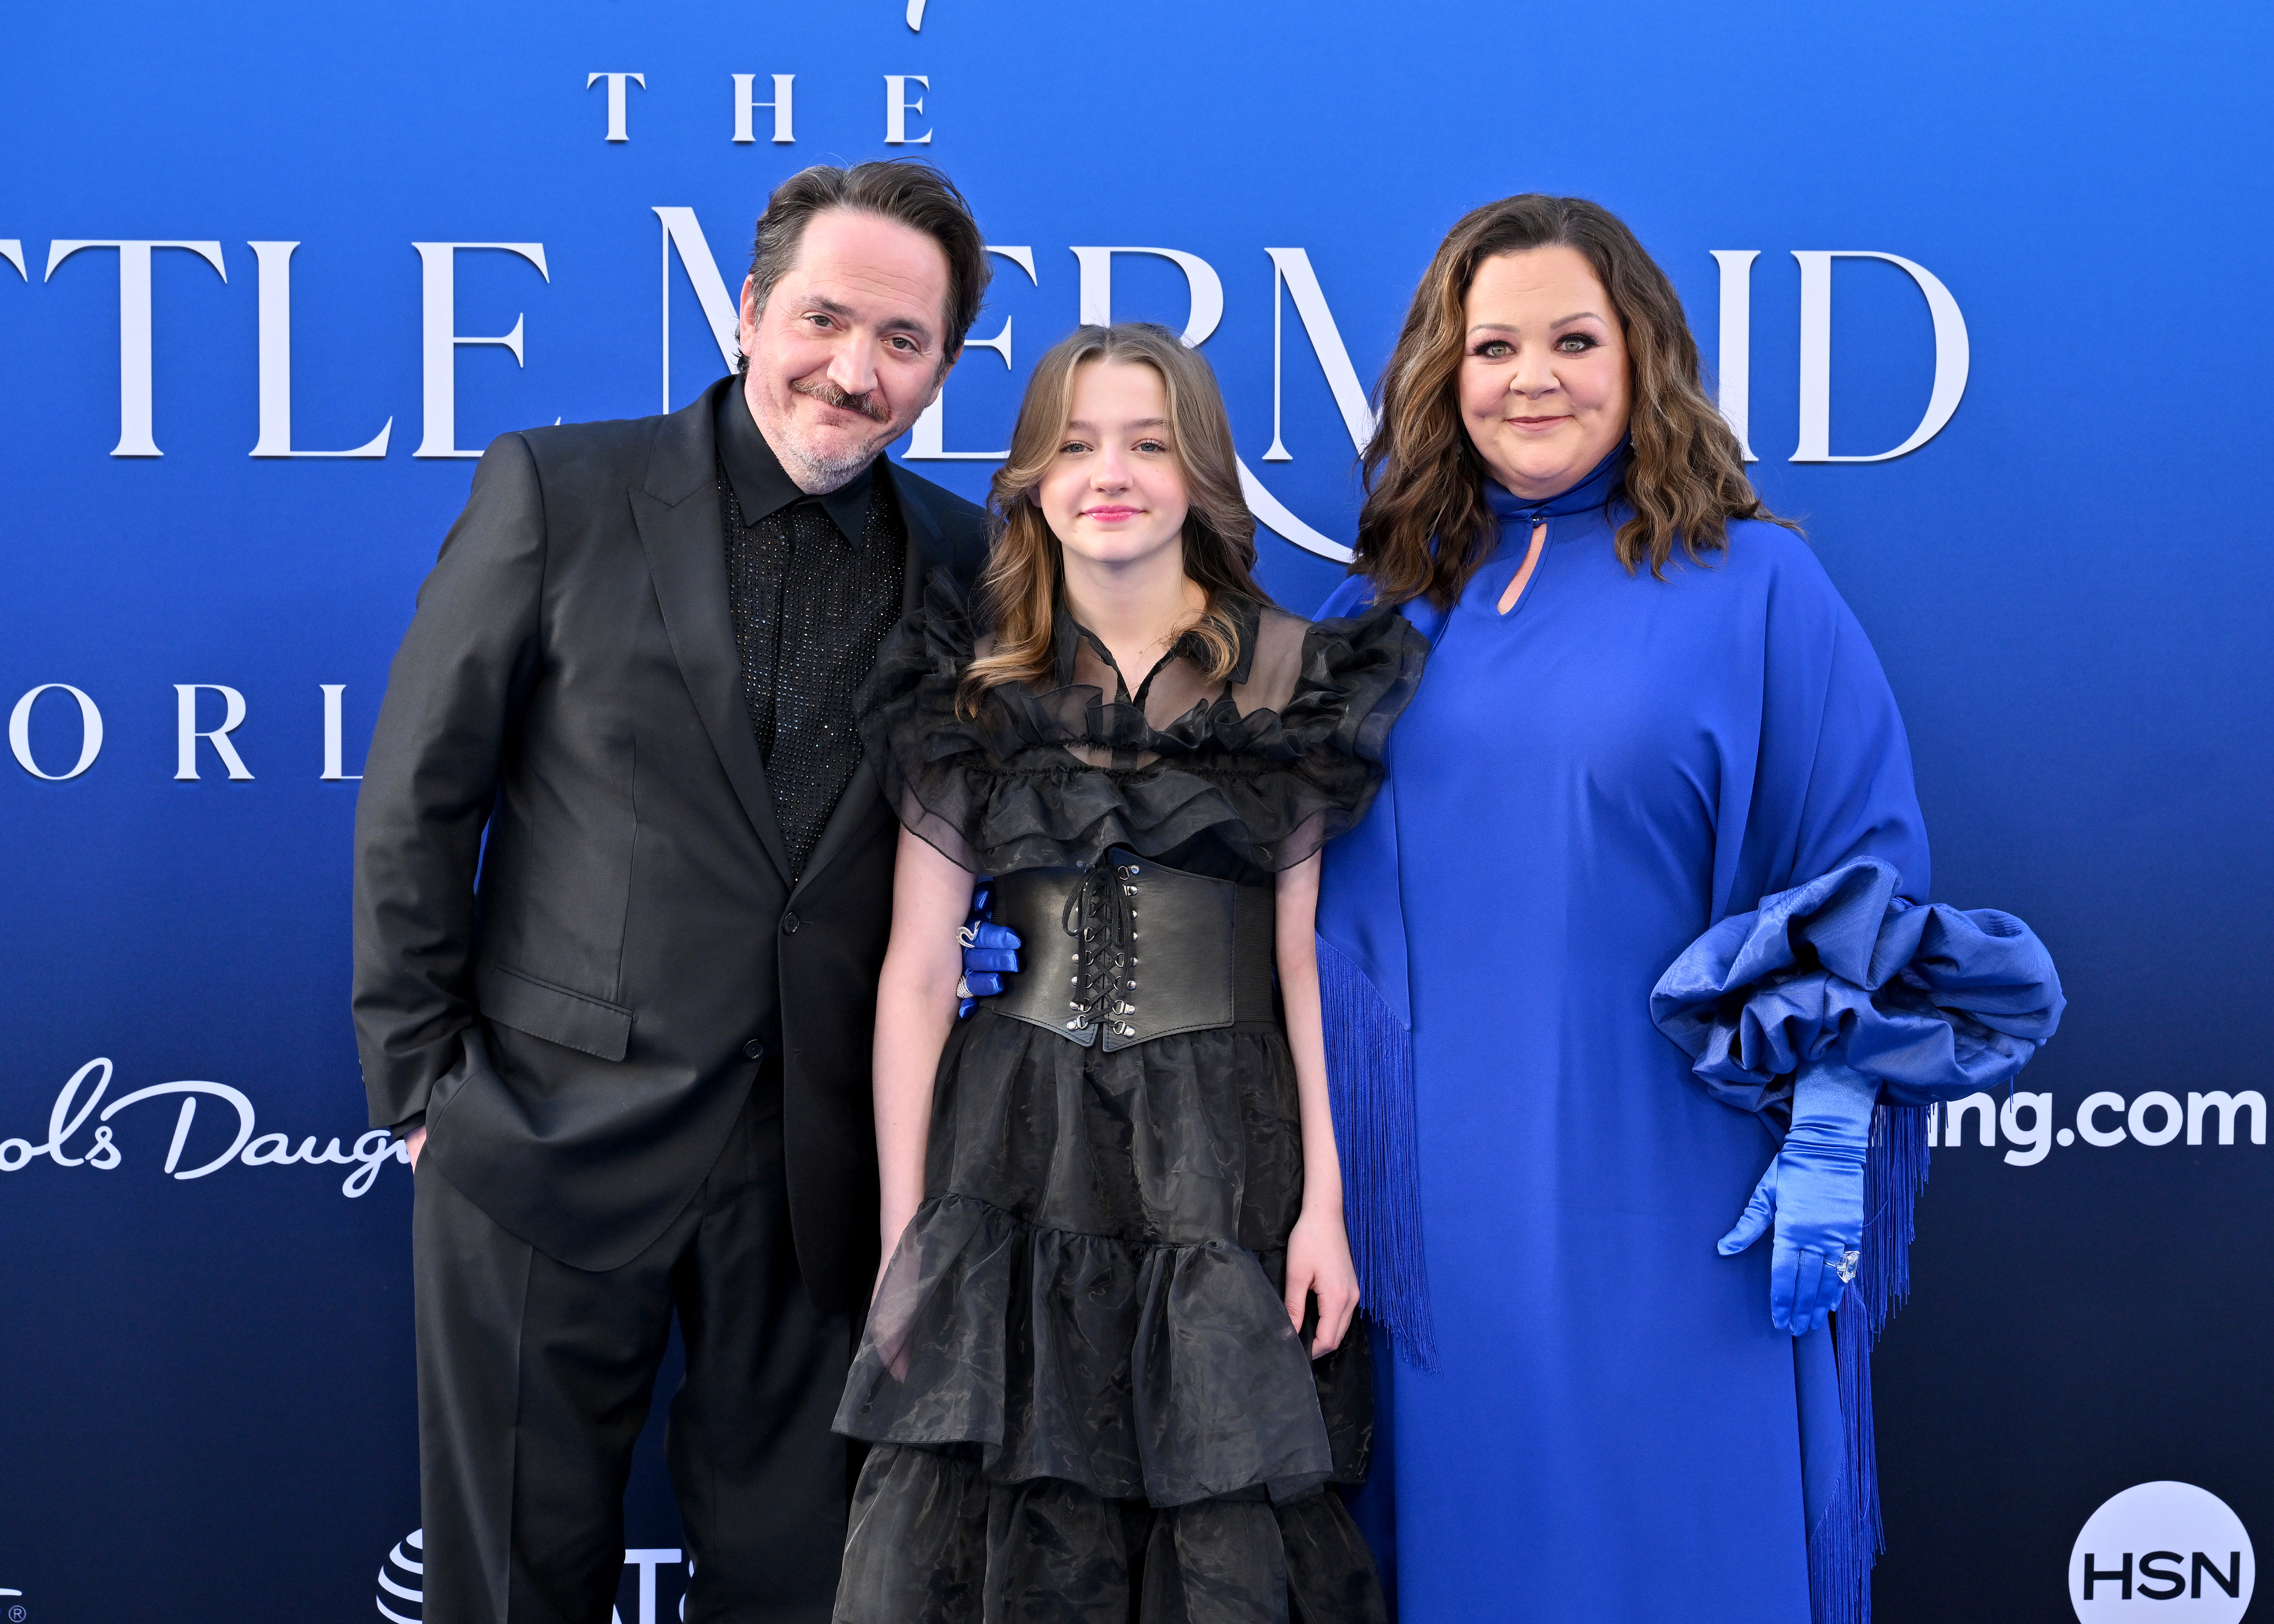 Ben and Vivian Falcone with Melissa McCarthy at the premiere of "The Little Mermaid" in Hollywood, California on May 8, 2023 | Source: Getty Images